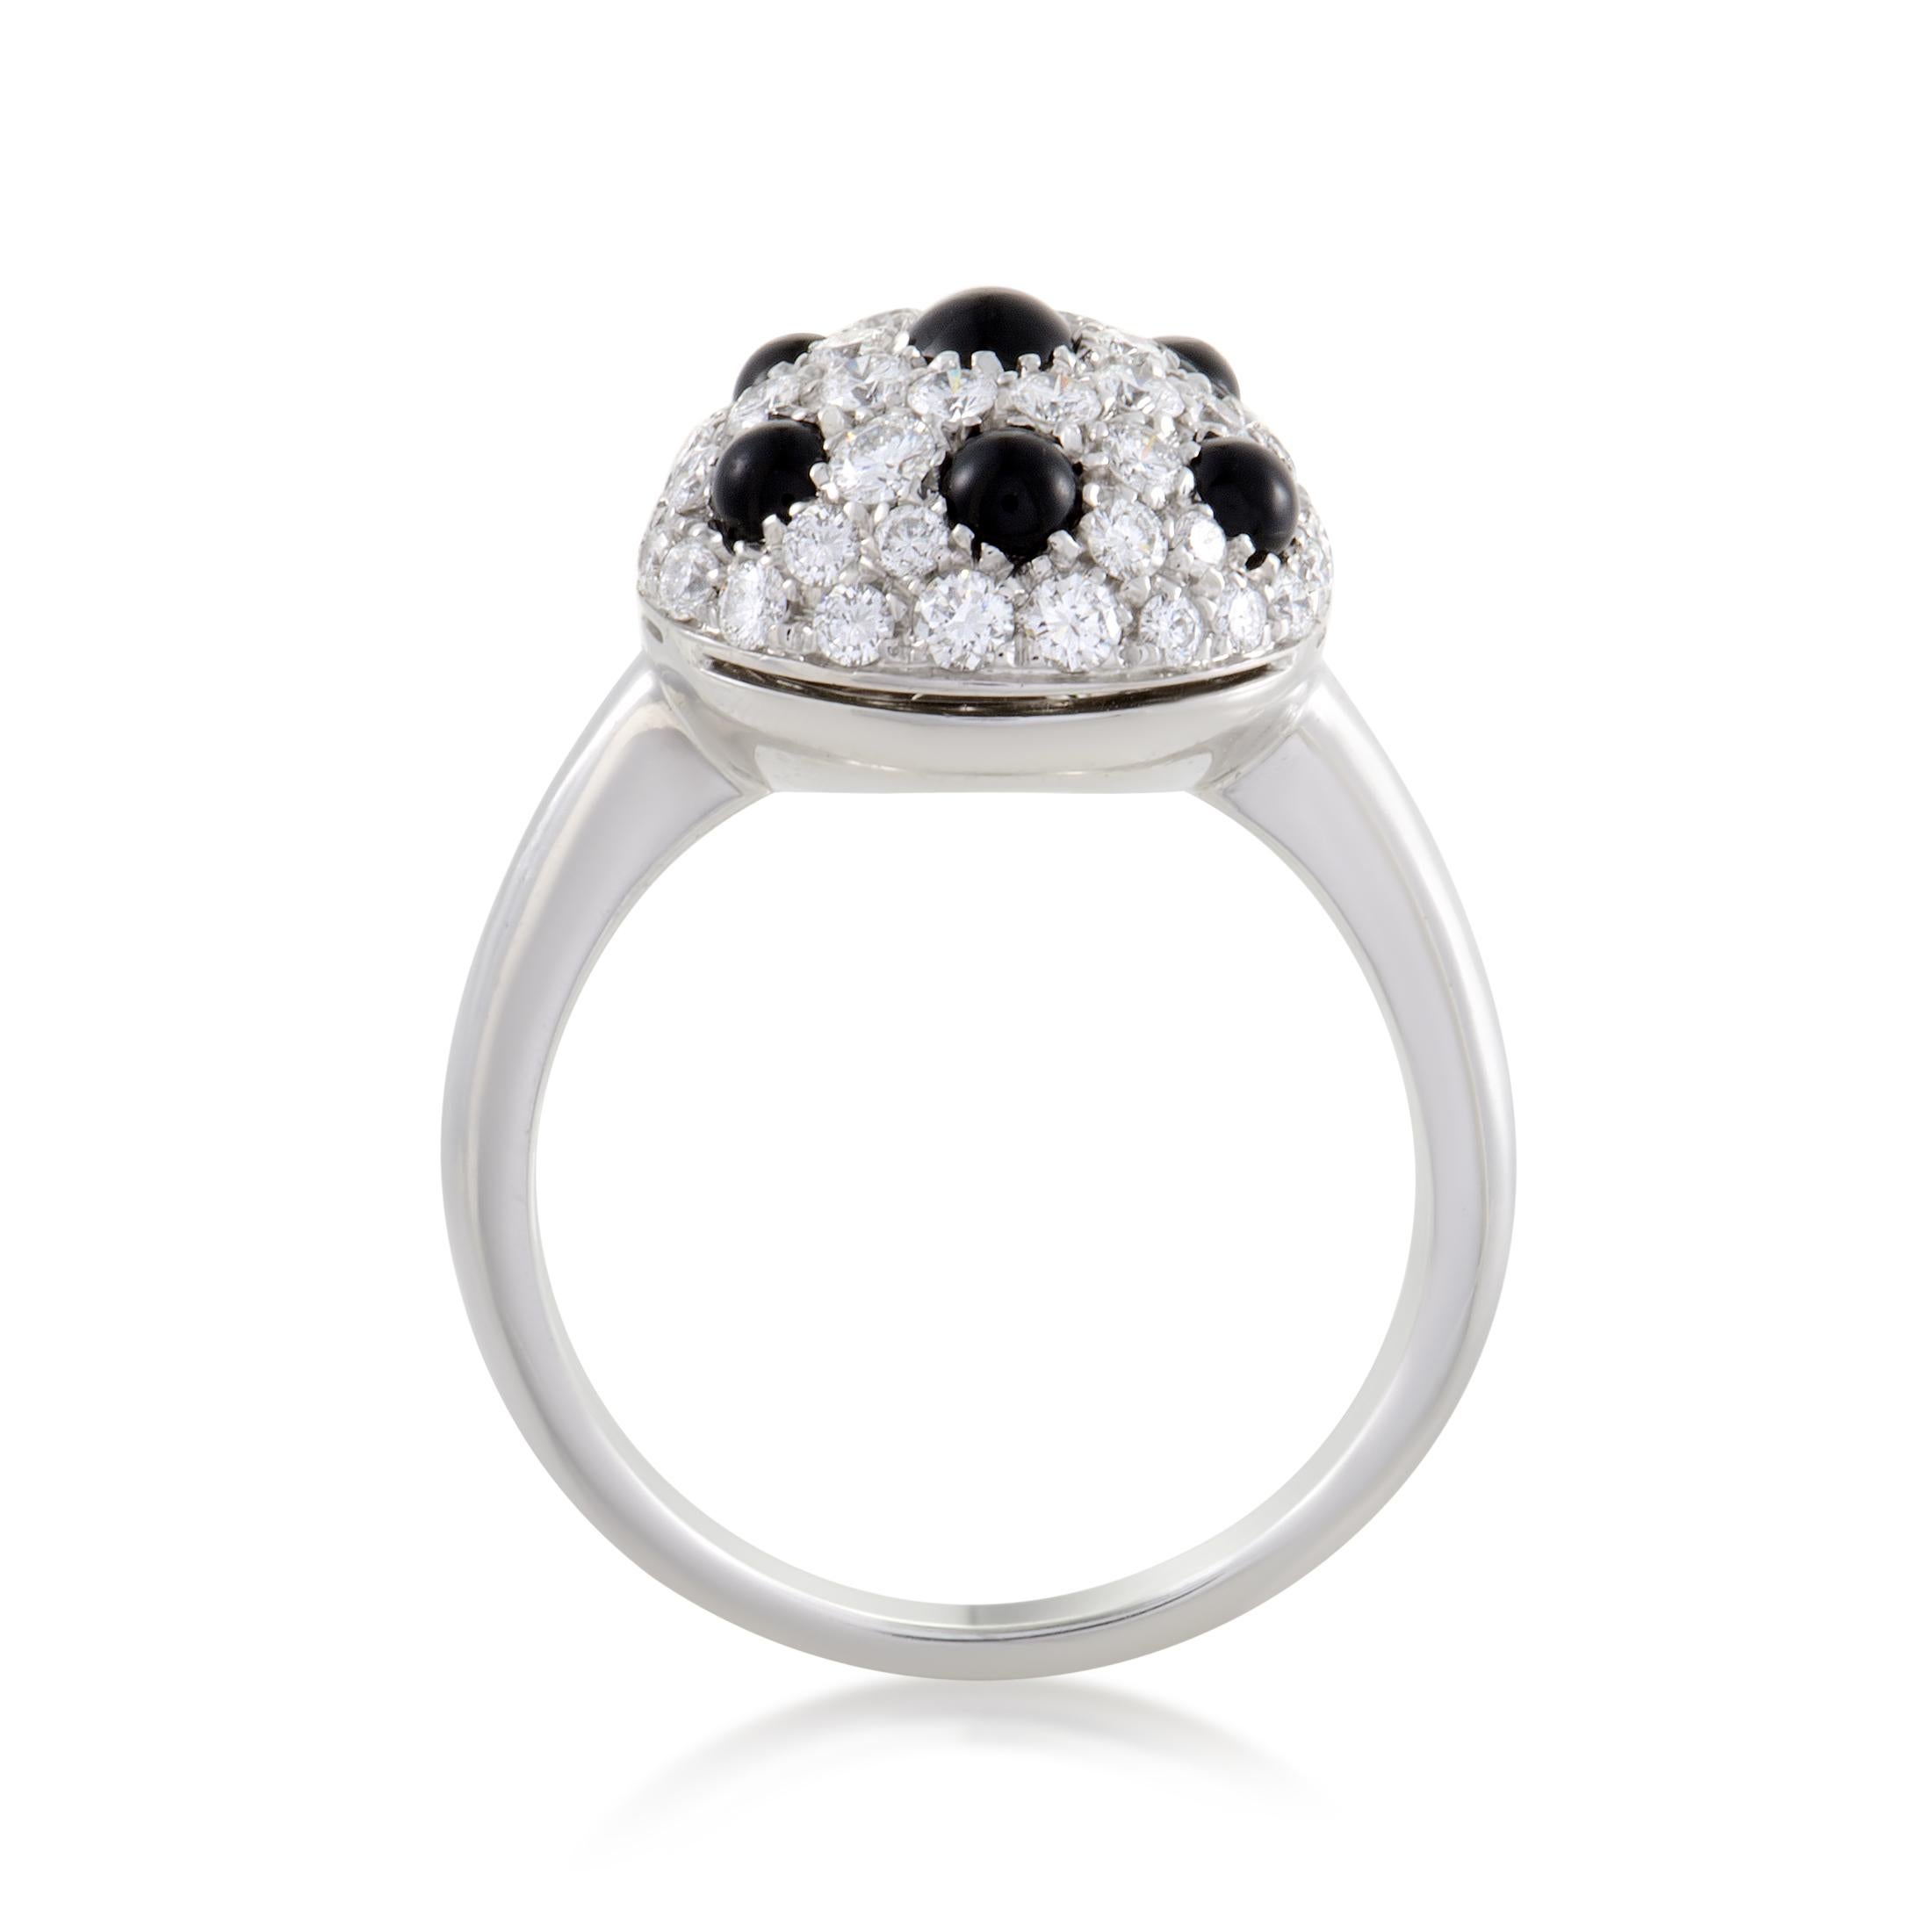 Resplendent and mesmerizing, the astonishing arrangement of diamonds weighing in total 1.13 carats is contrasted by the striking onyx stones upon the 18K white gold body of this lavish ring from Picchiotti for a dazzling effect.<br />Ring Top